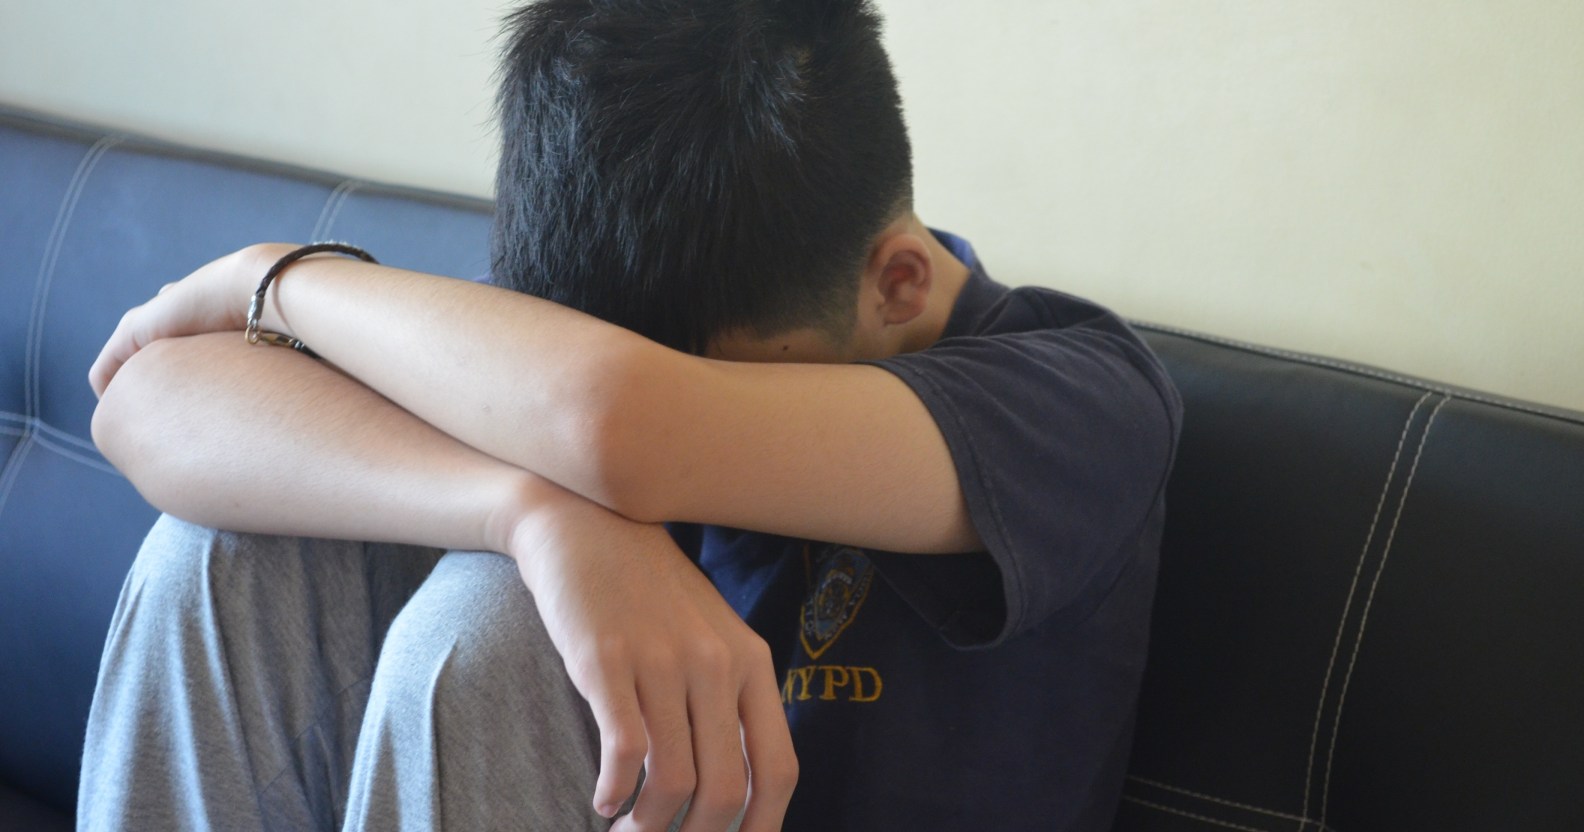 Xxx School Boys Girls Video - 13-year-old boy sexually abused 'by 21 men' on Grindr | PinkNews